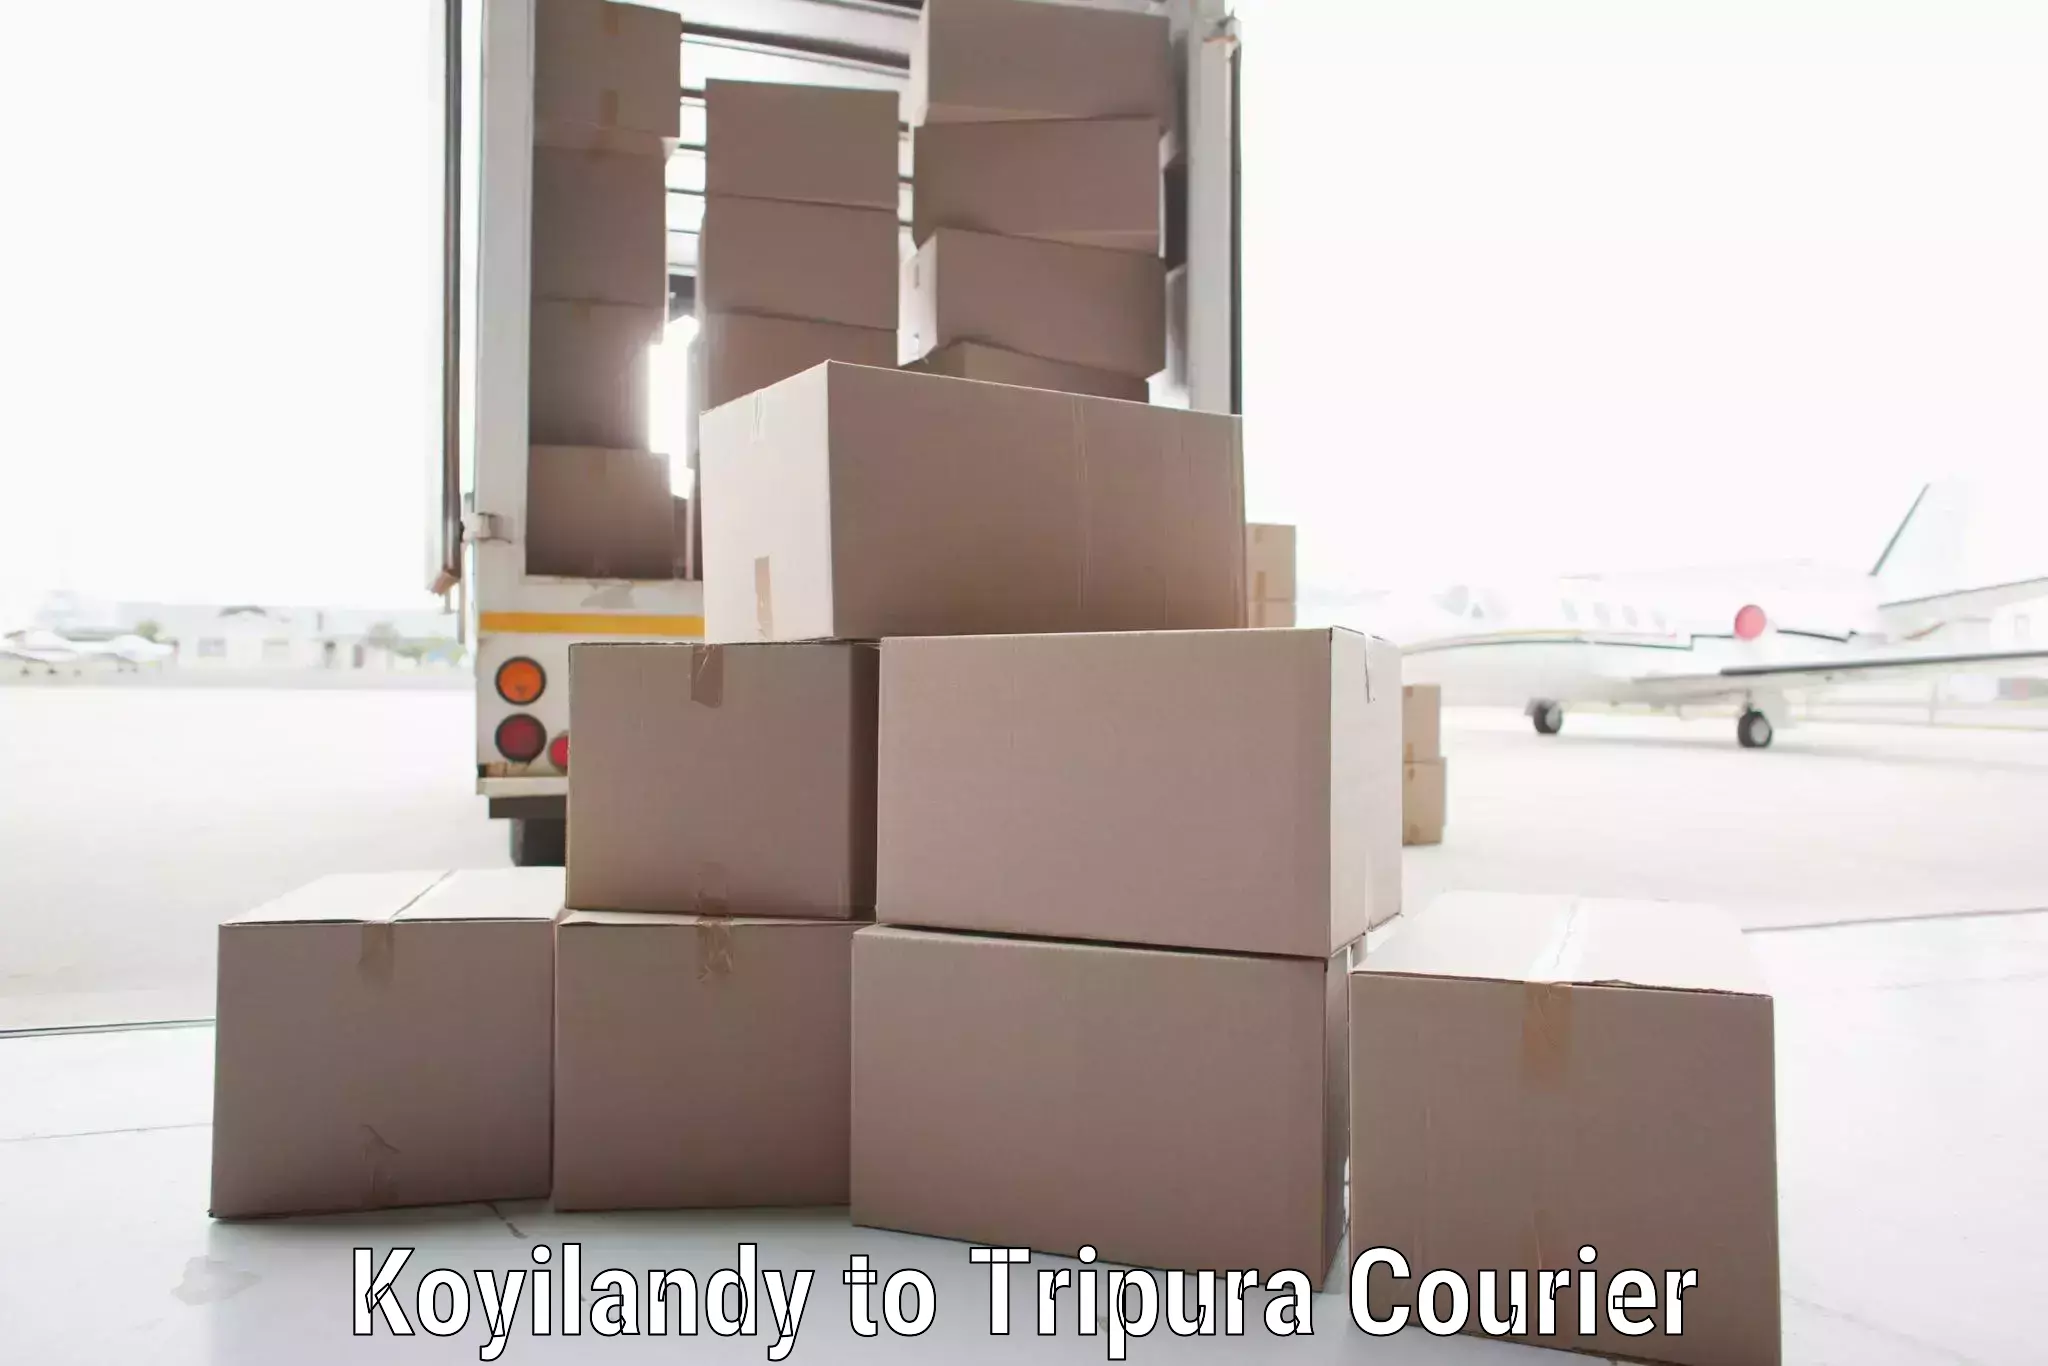 Customized delivery options Koyilandy to Udaipur Tripura